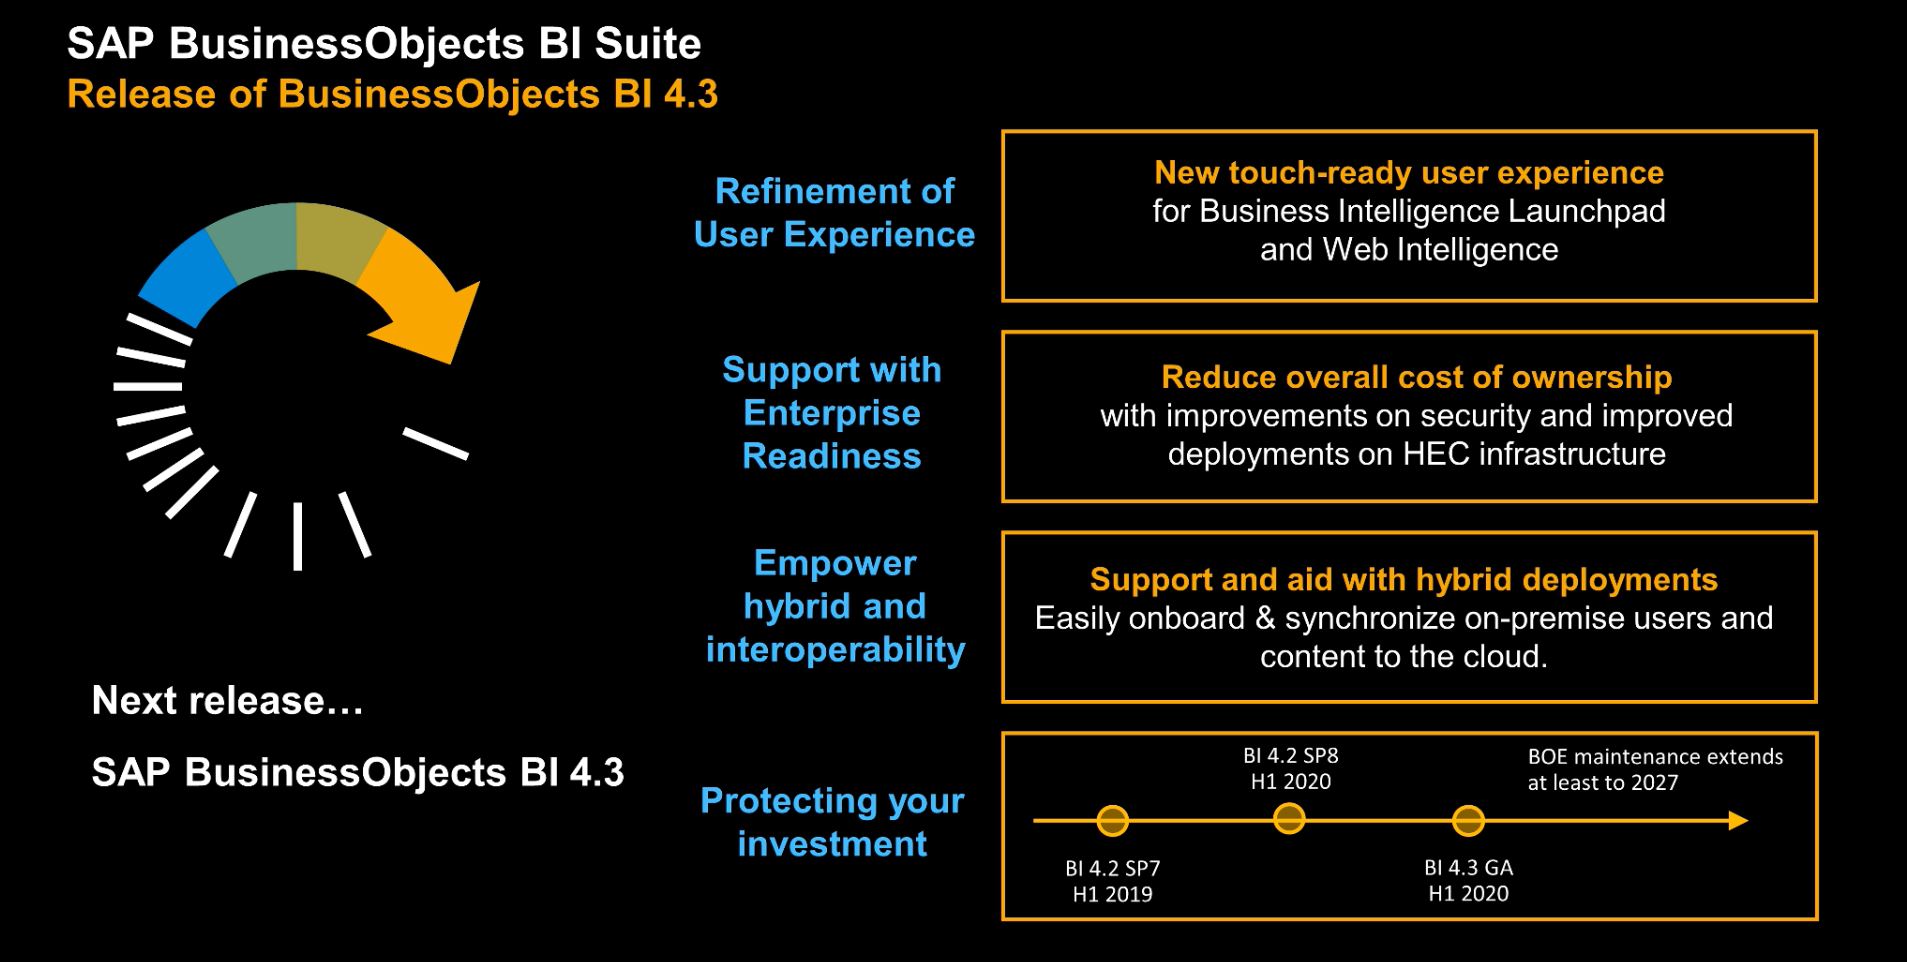 Picture of SAP Businessobjects BI tools.